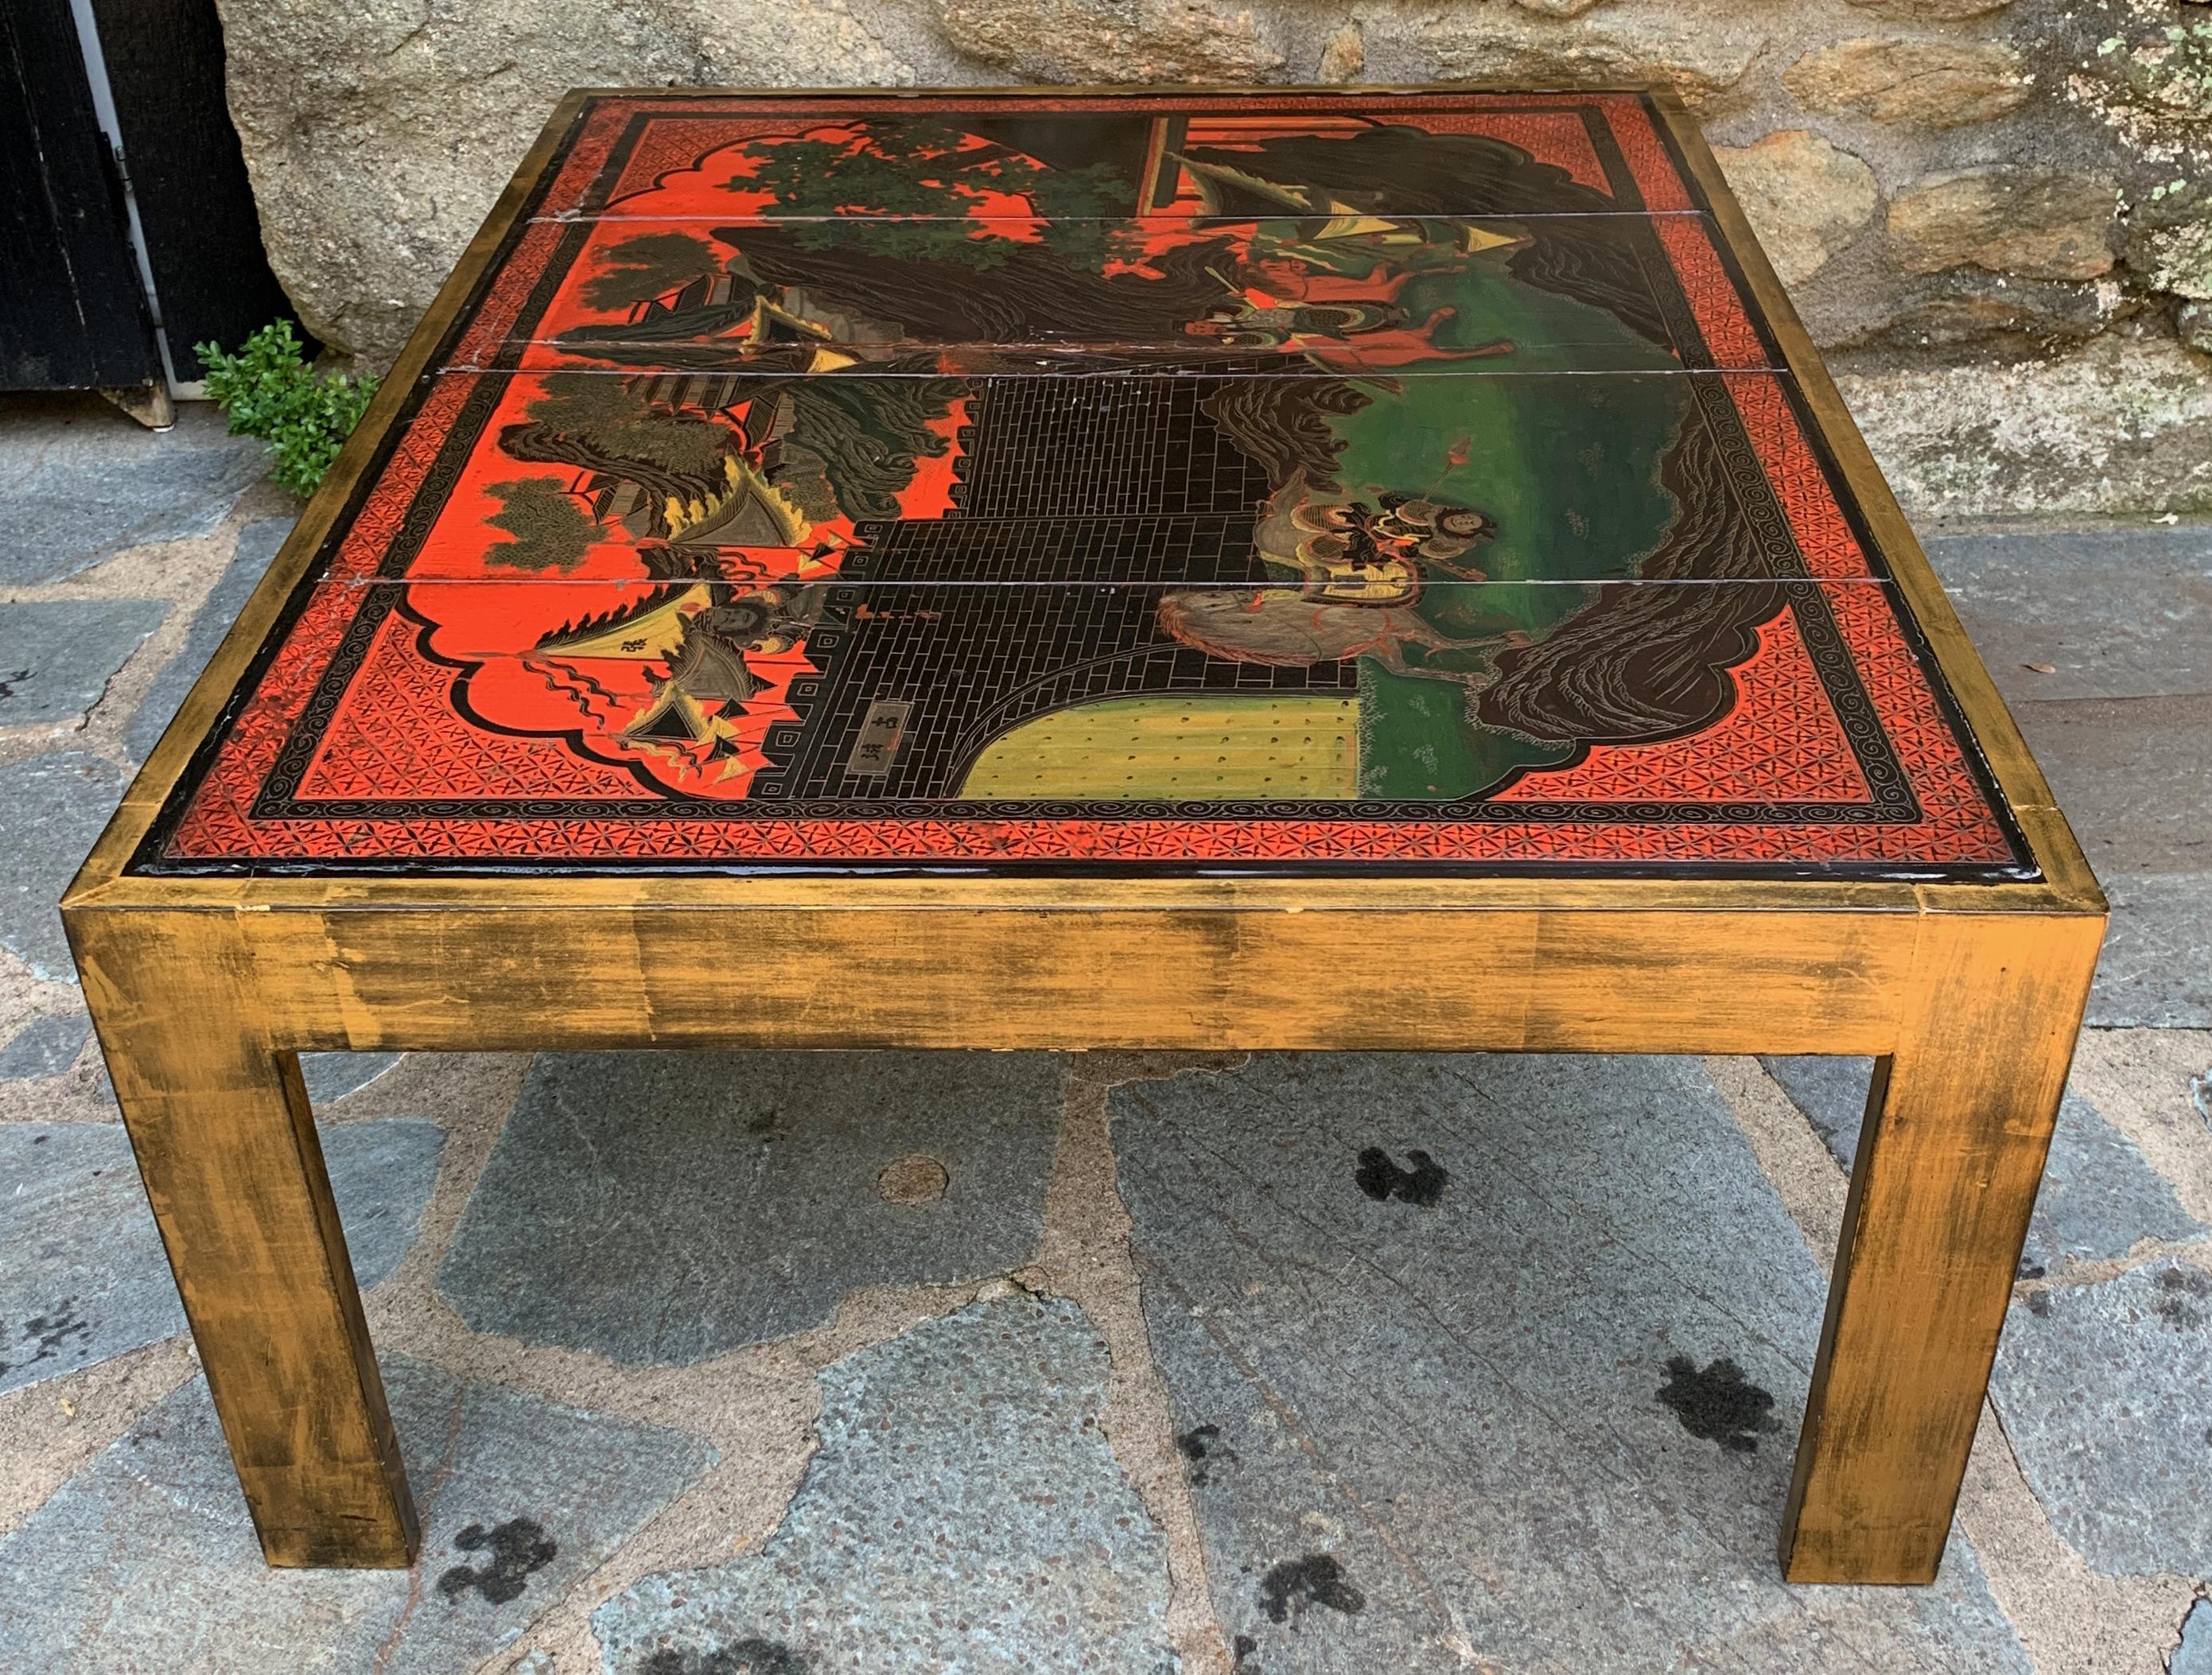 A late 20th century cocktail table fashioned from a Chinese Coromandel screen. The simple square gilt decorated legs supporting the polychrome lacquered surface.